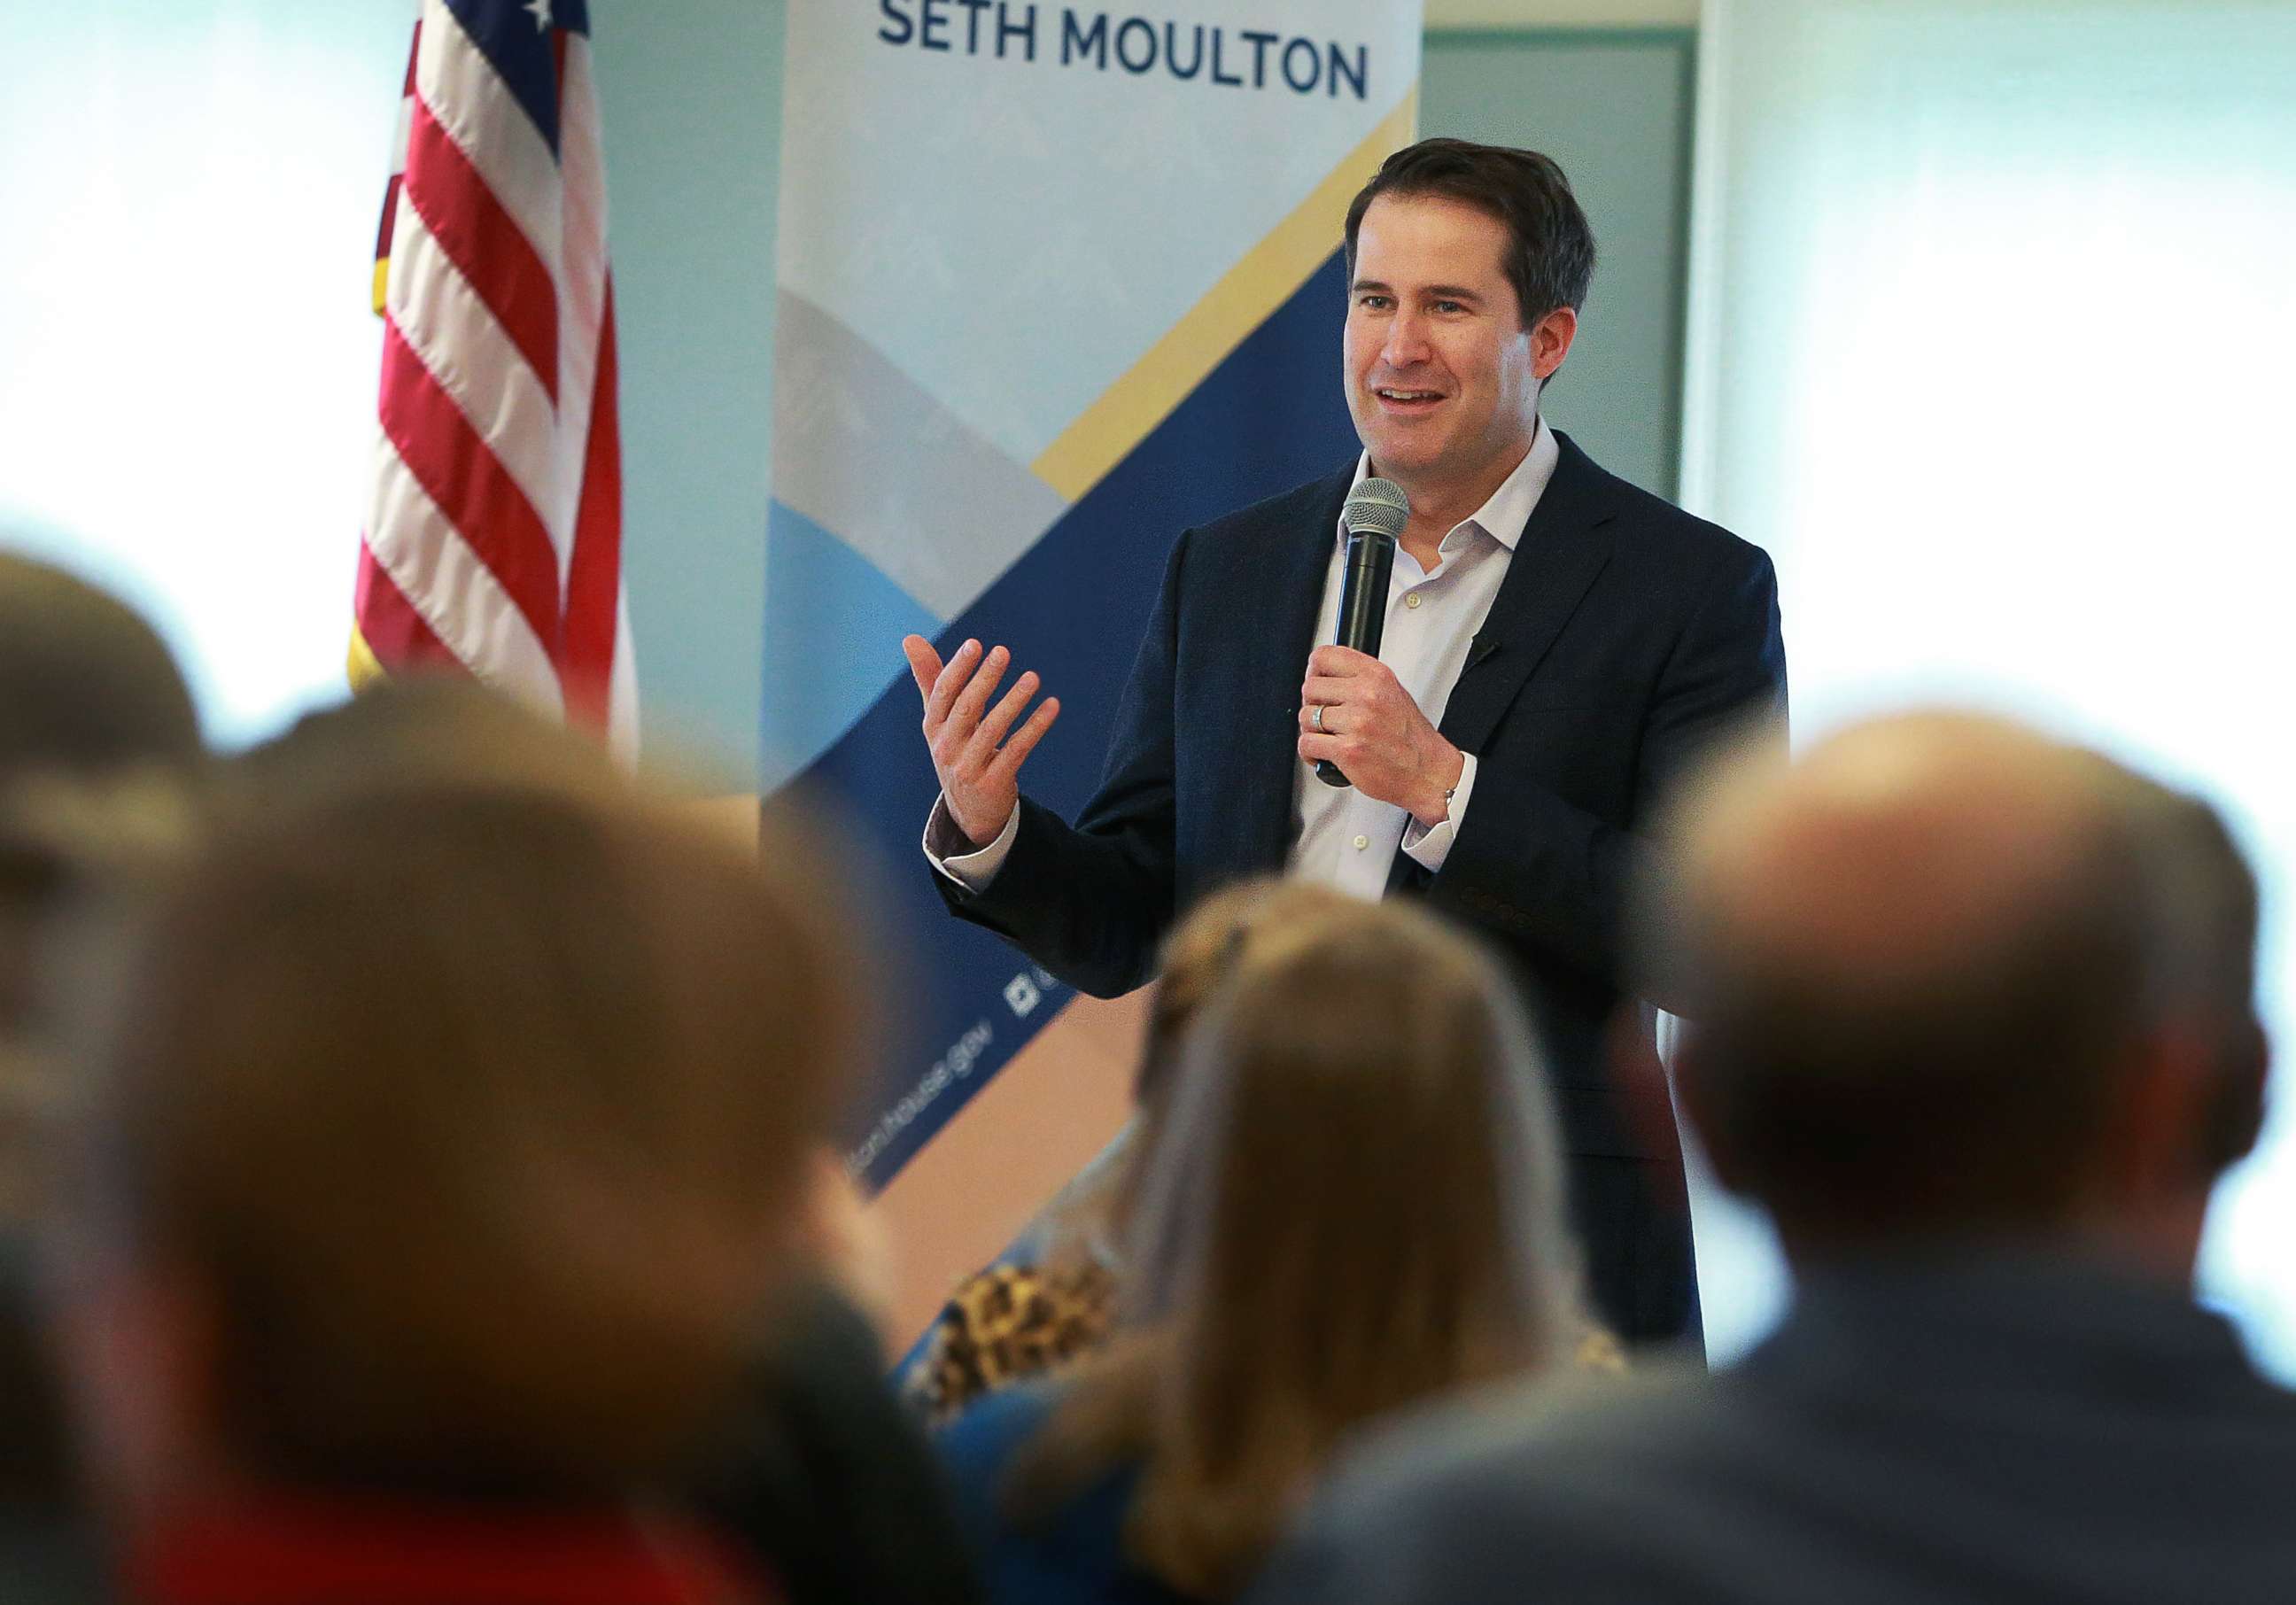 PHOTO: Massachusetts congressman and presidential candidate Seth Moulton speaks at a Town Hall event at Newburyport Senior Community Center in Newburyport, Mass., May 5, 2019. 